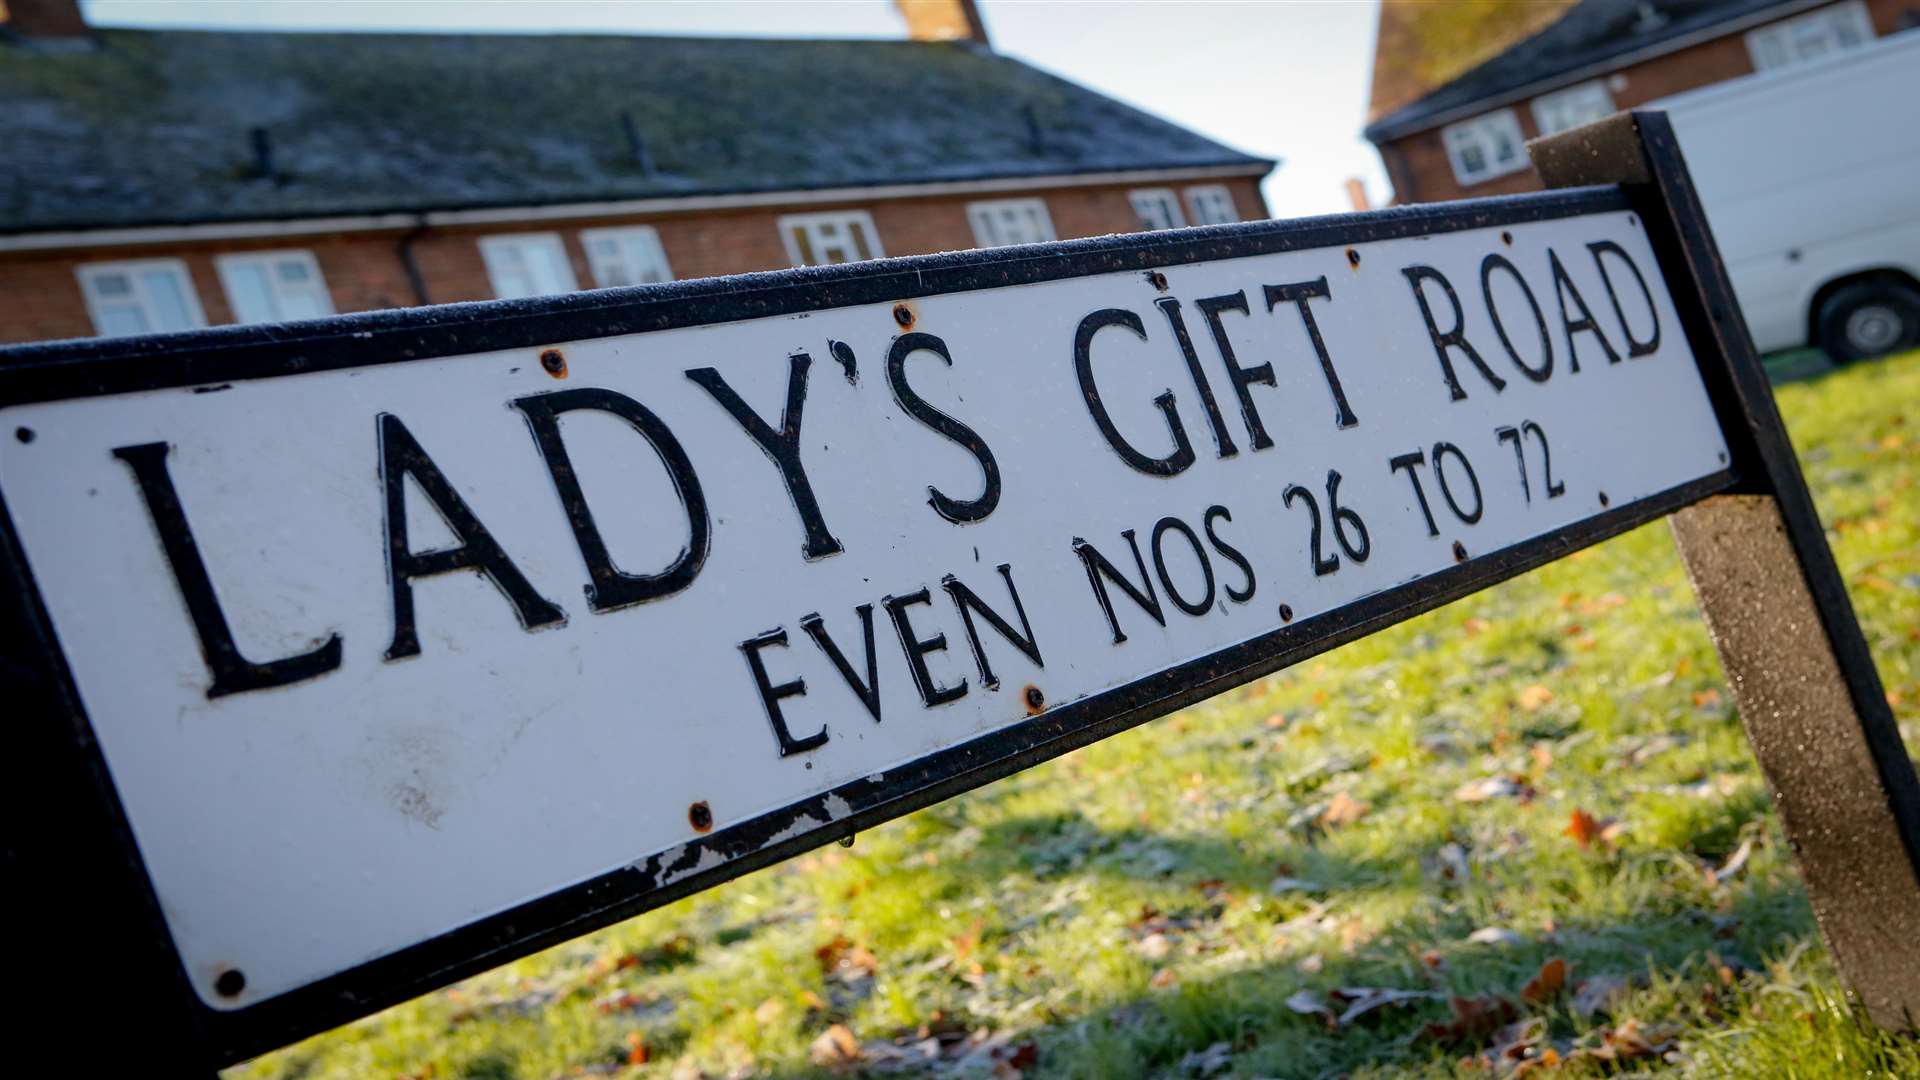 Police were called to Lady's Gift Road on Tuesday